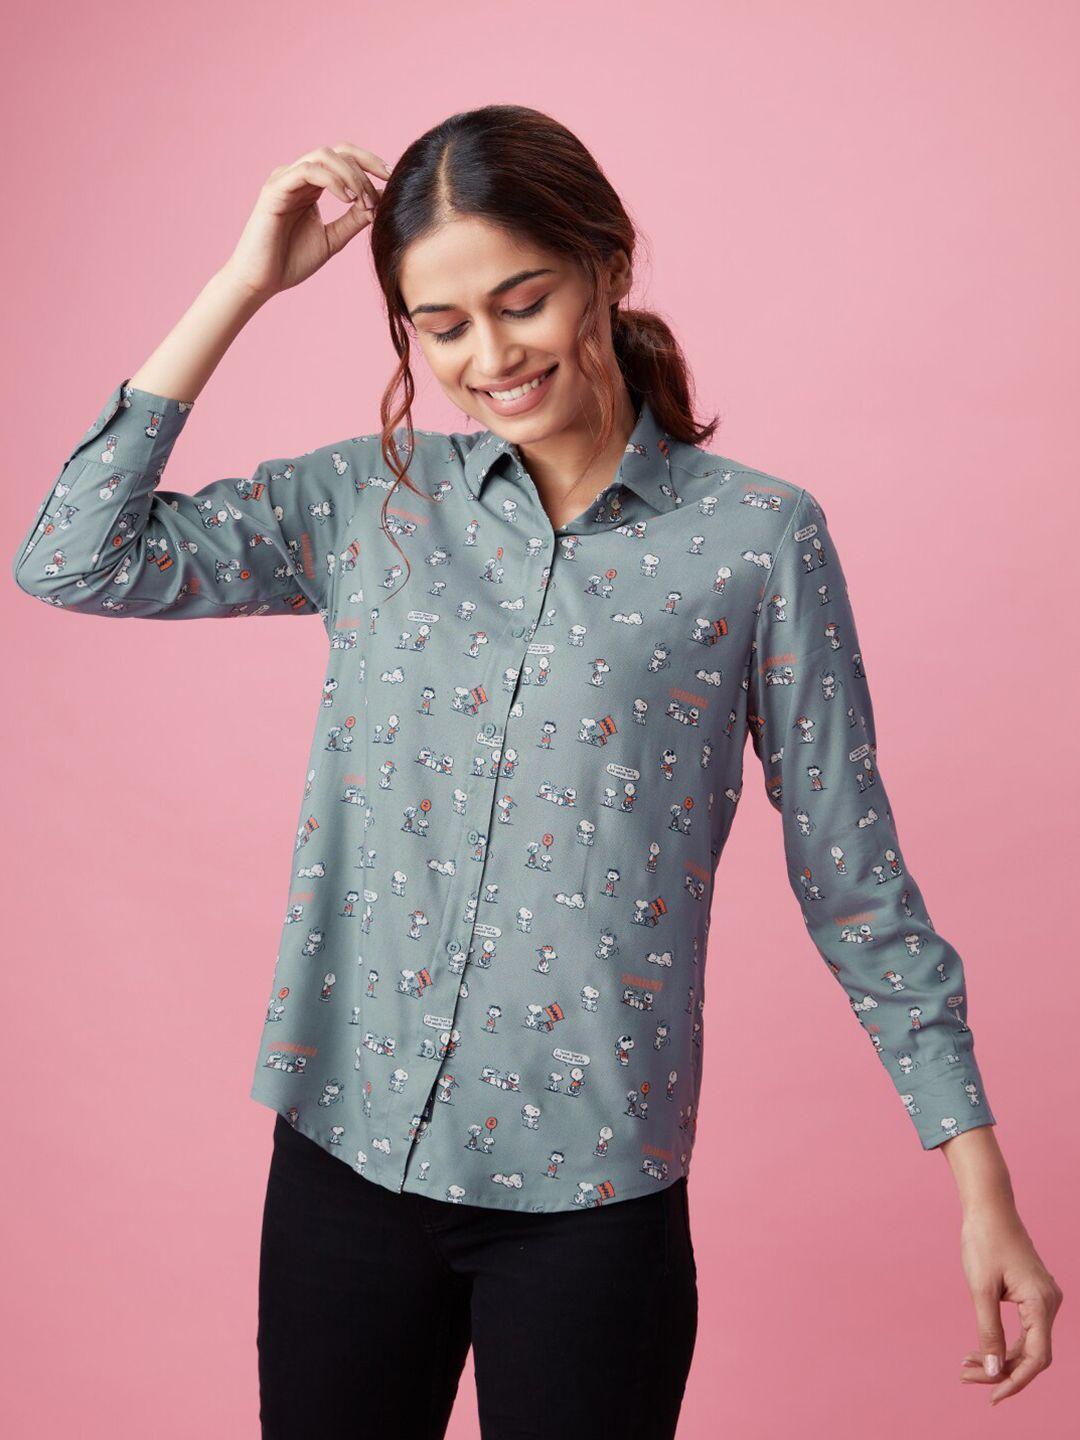 the souled store women grey modern printed casual shirt